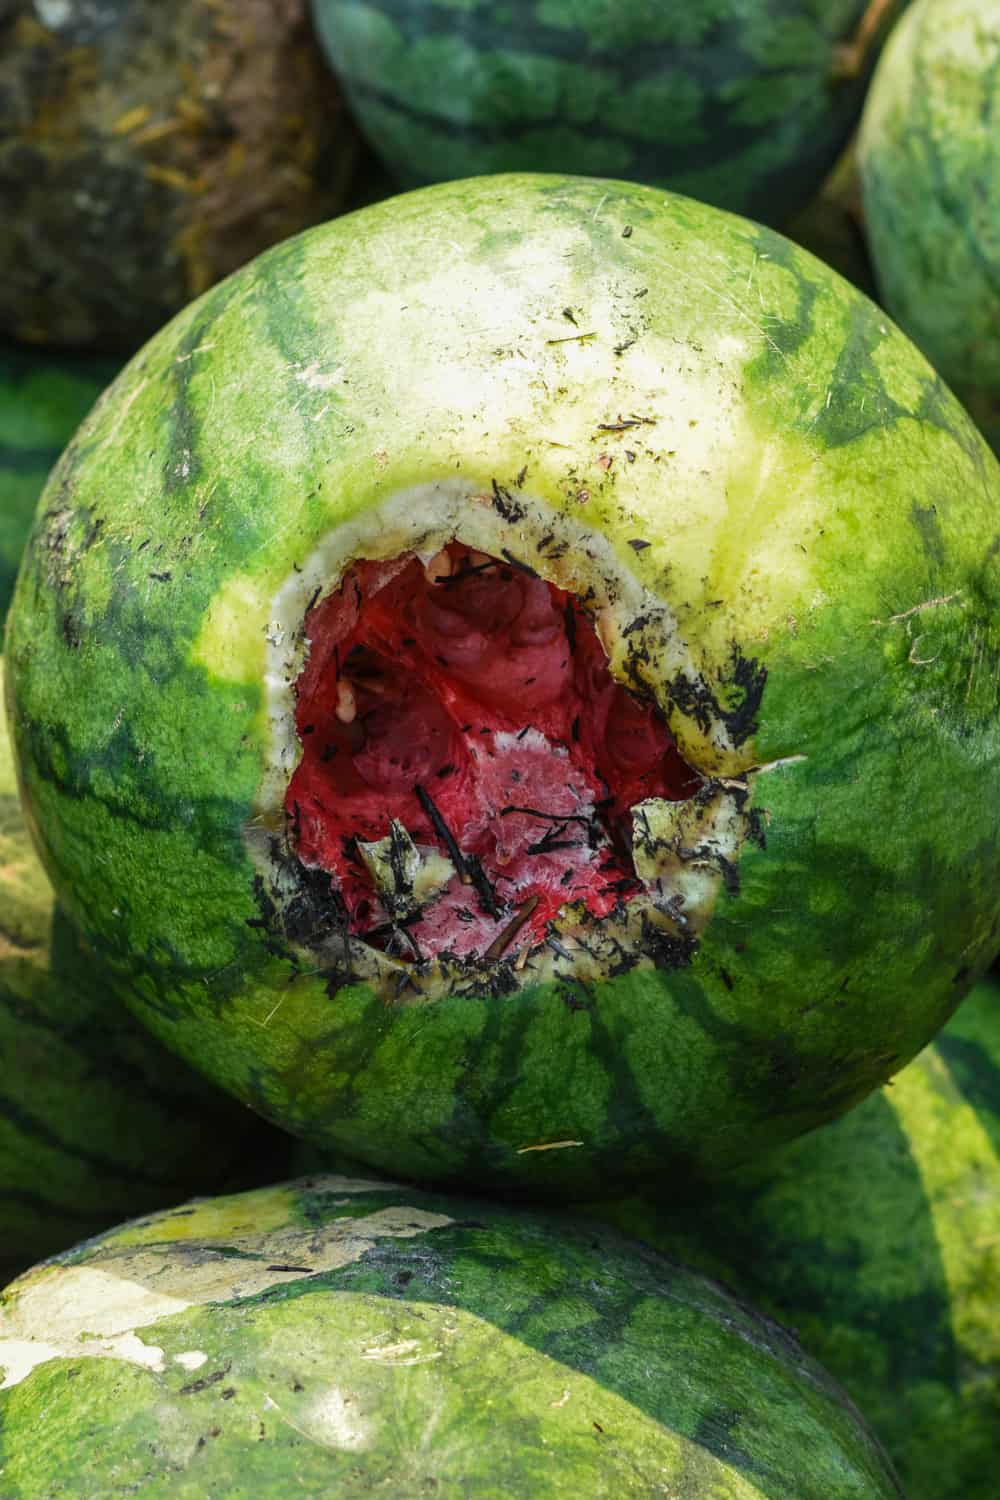 Does Watermelon Go Bad